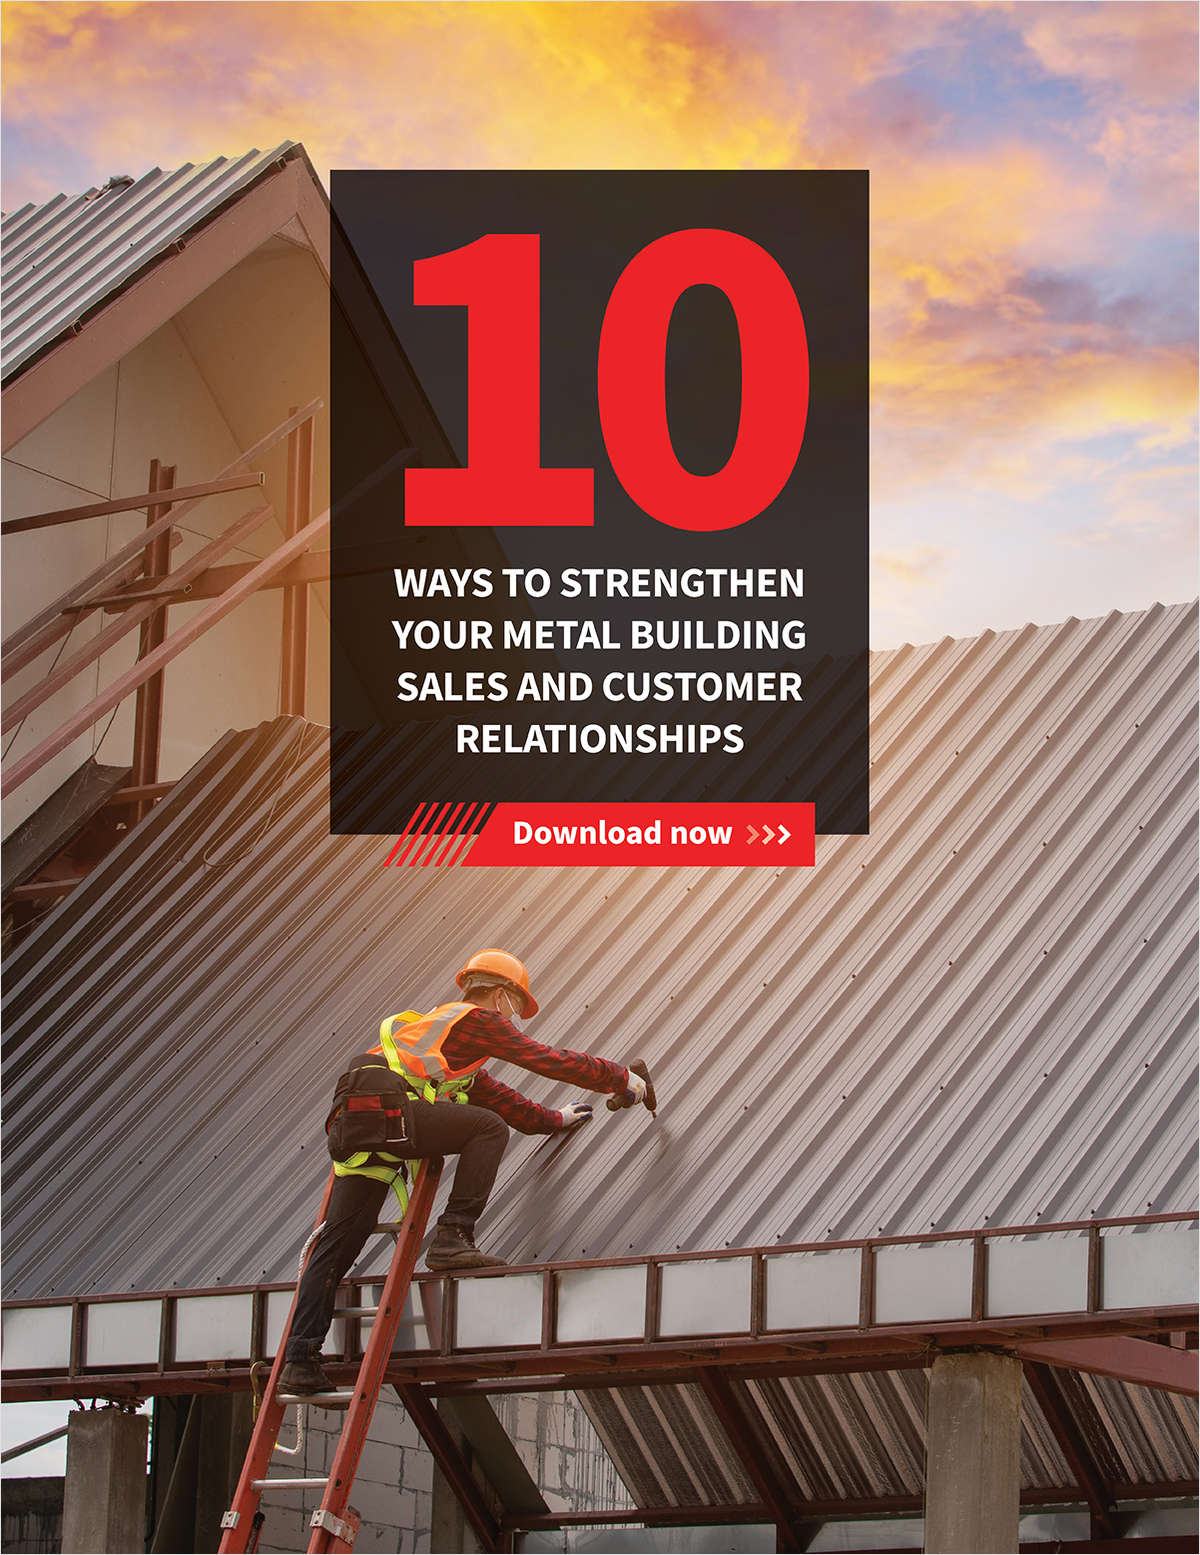 10 Ways to Strengthen Your Metal Building Sales and Customer Relationships